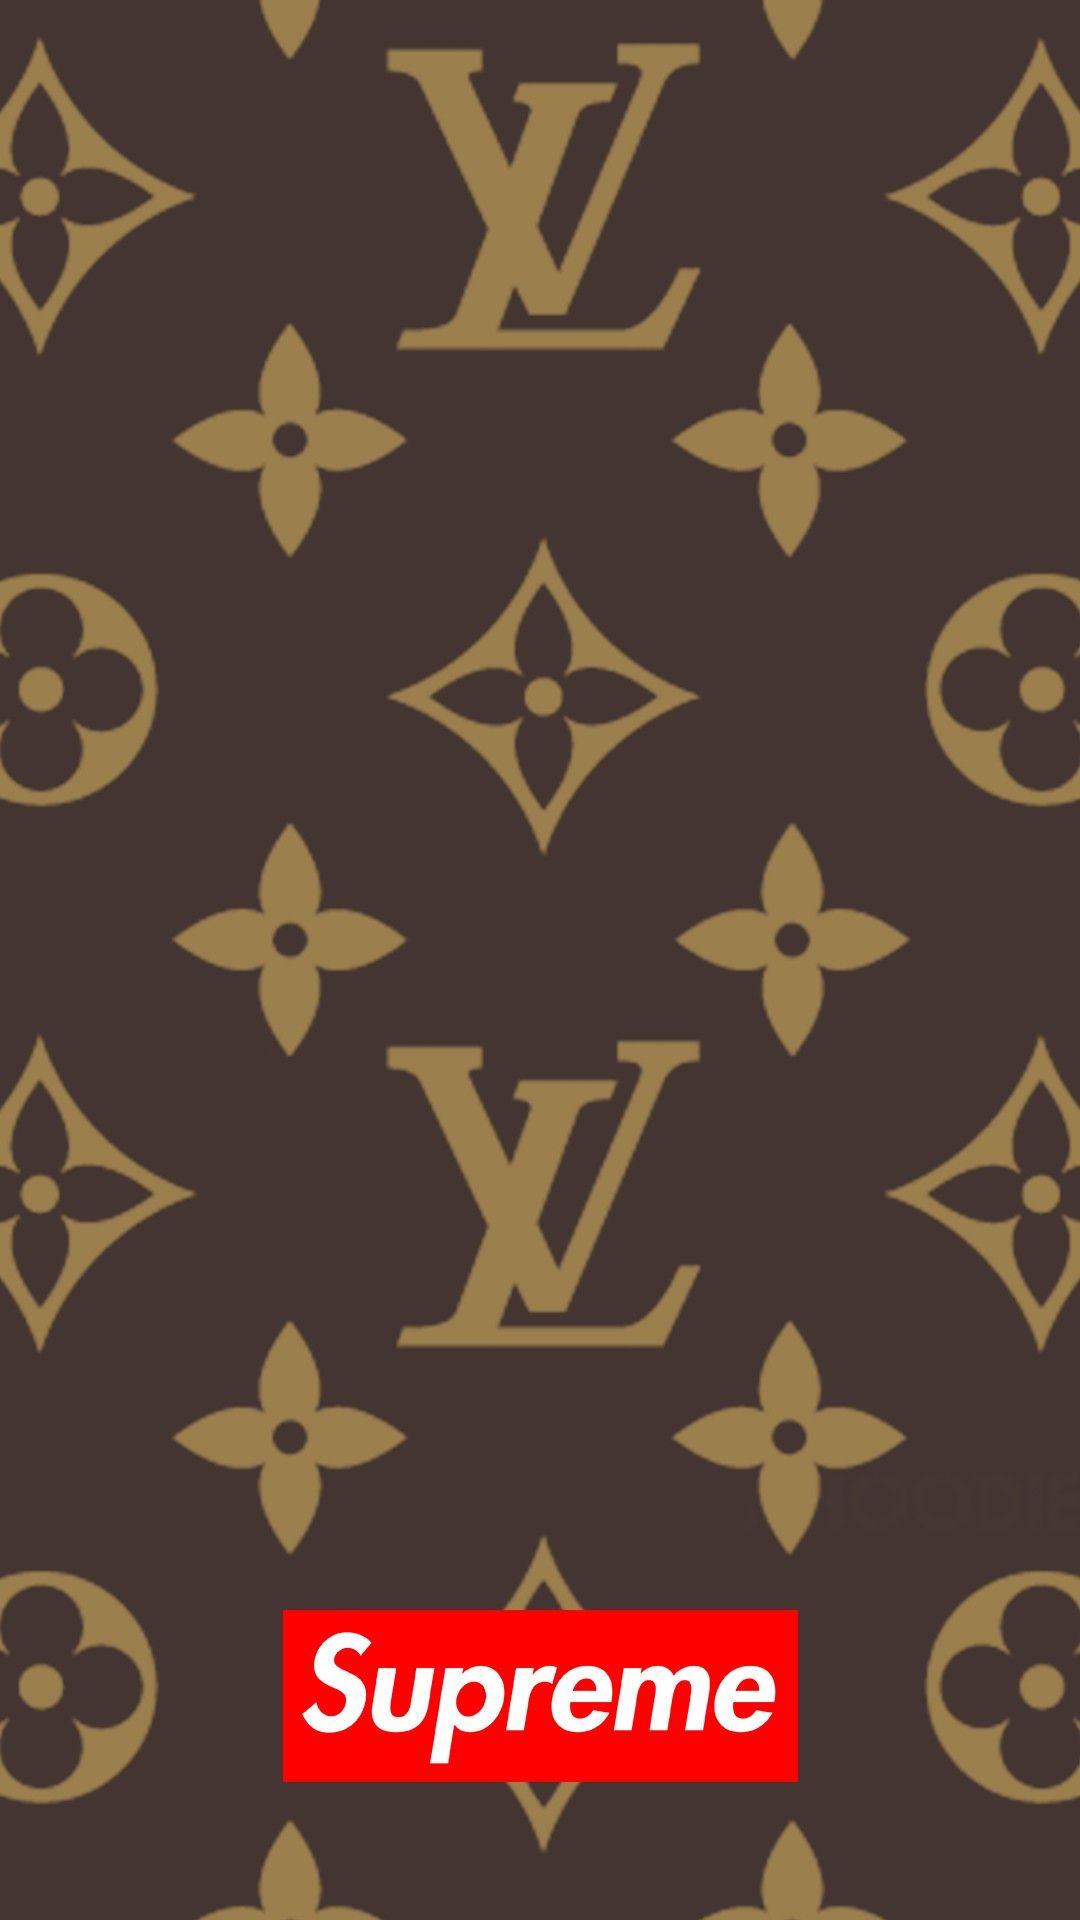 LV fancy logo gold wallpaper by societys2cent  Download on ZEDGE  387d